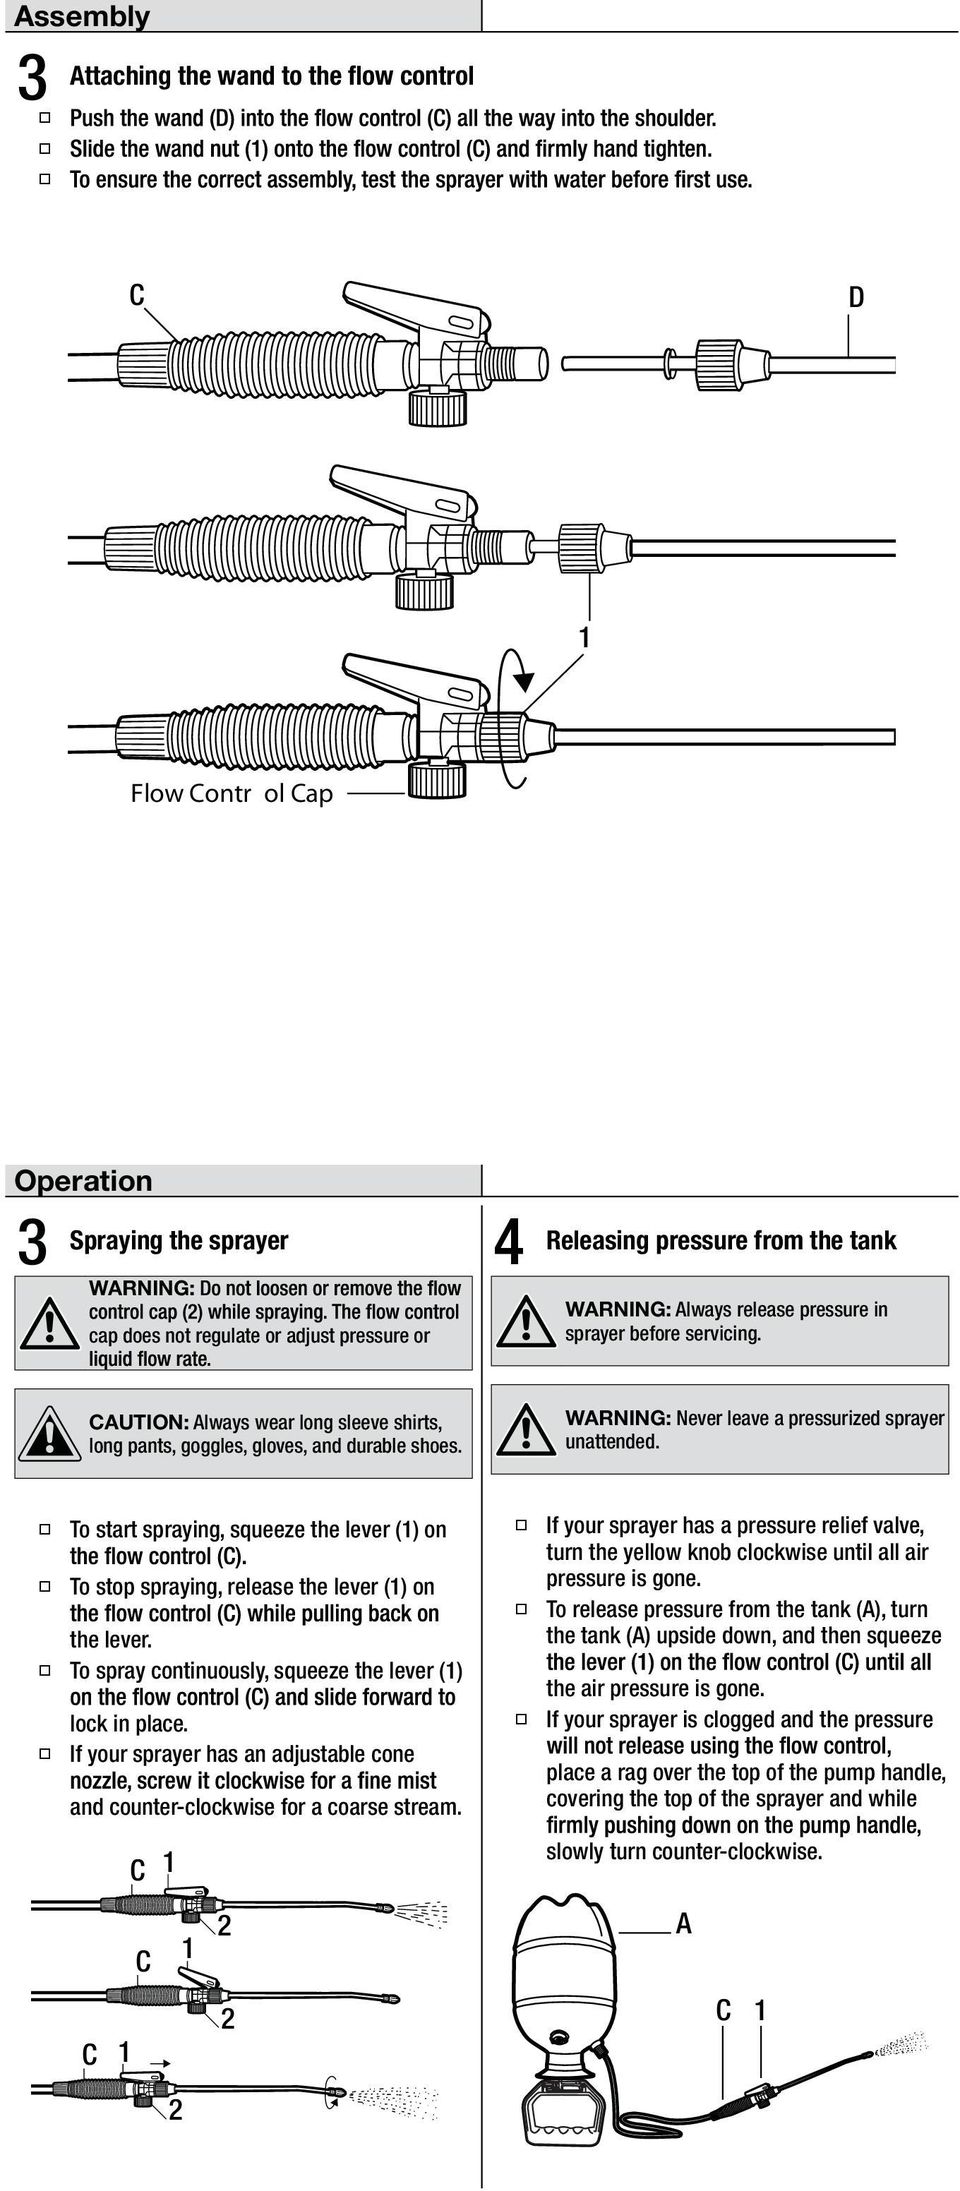 To start spraying, squeeze the lever () on To stop spraying, release the lever () on the lever. To spray continuously, squeeze the lever () lock in place.